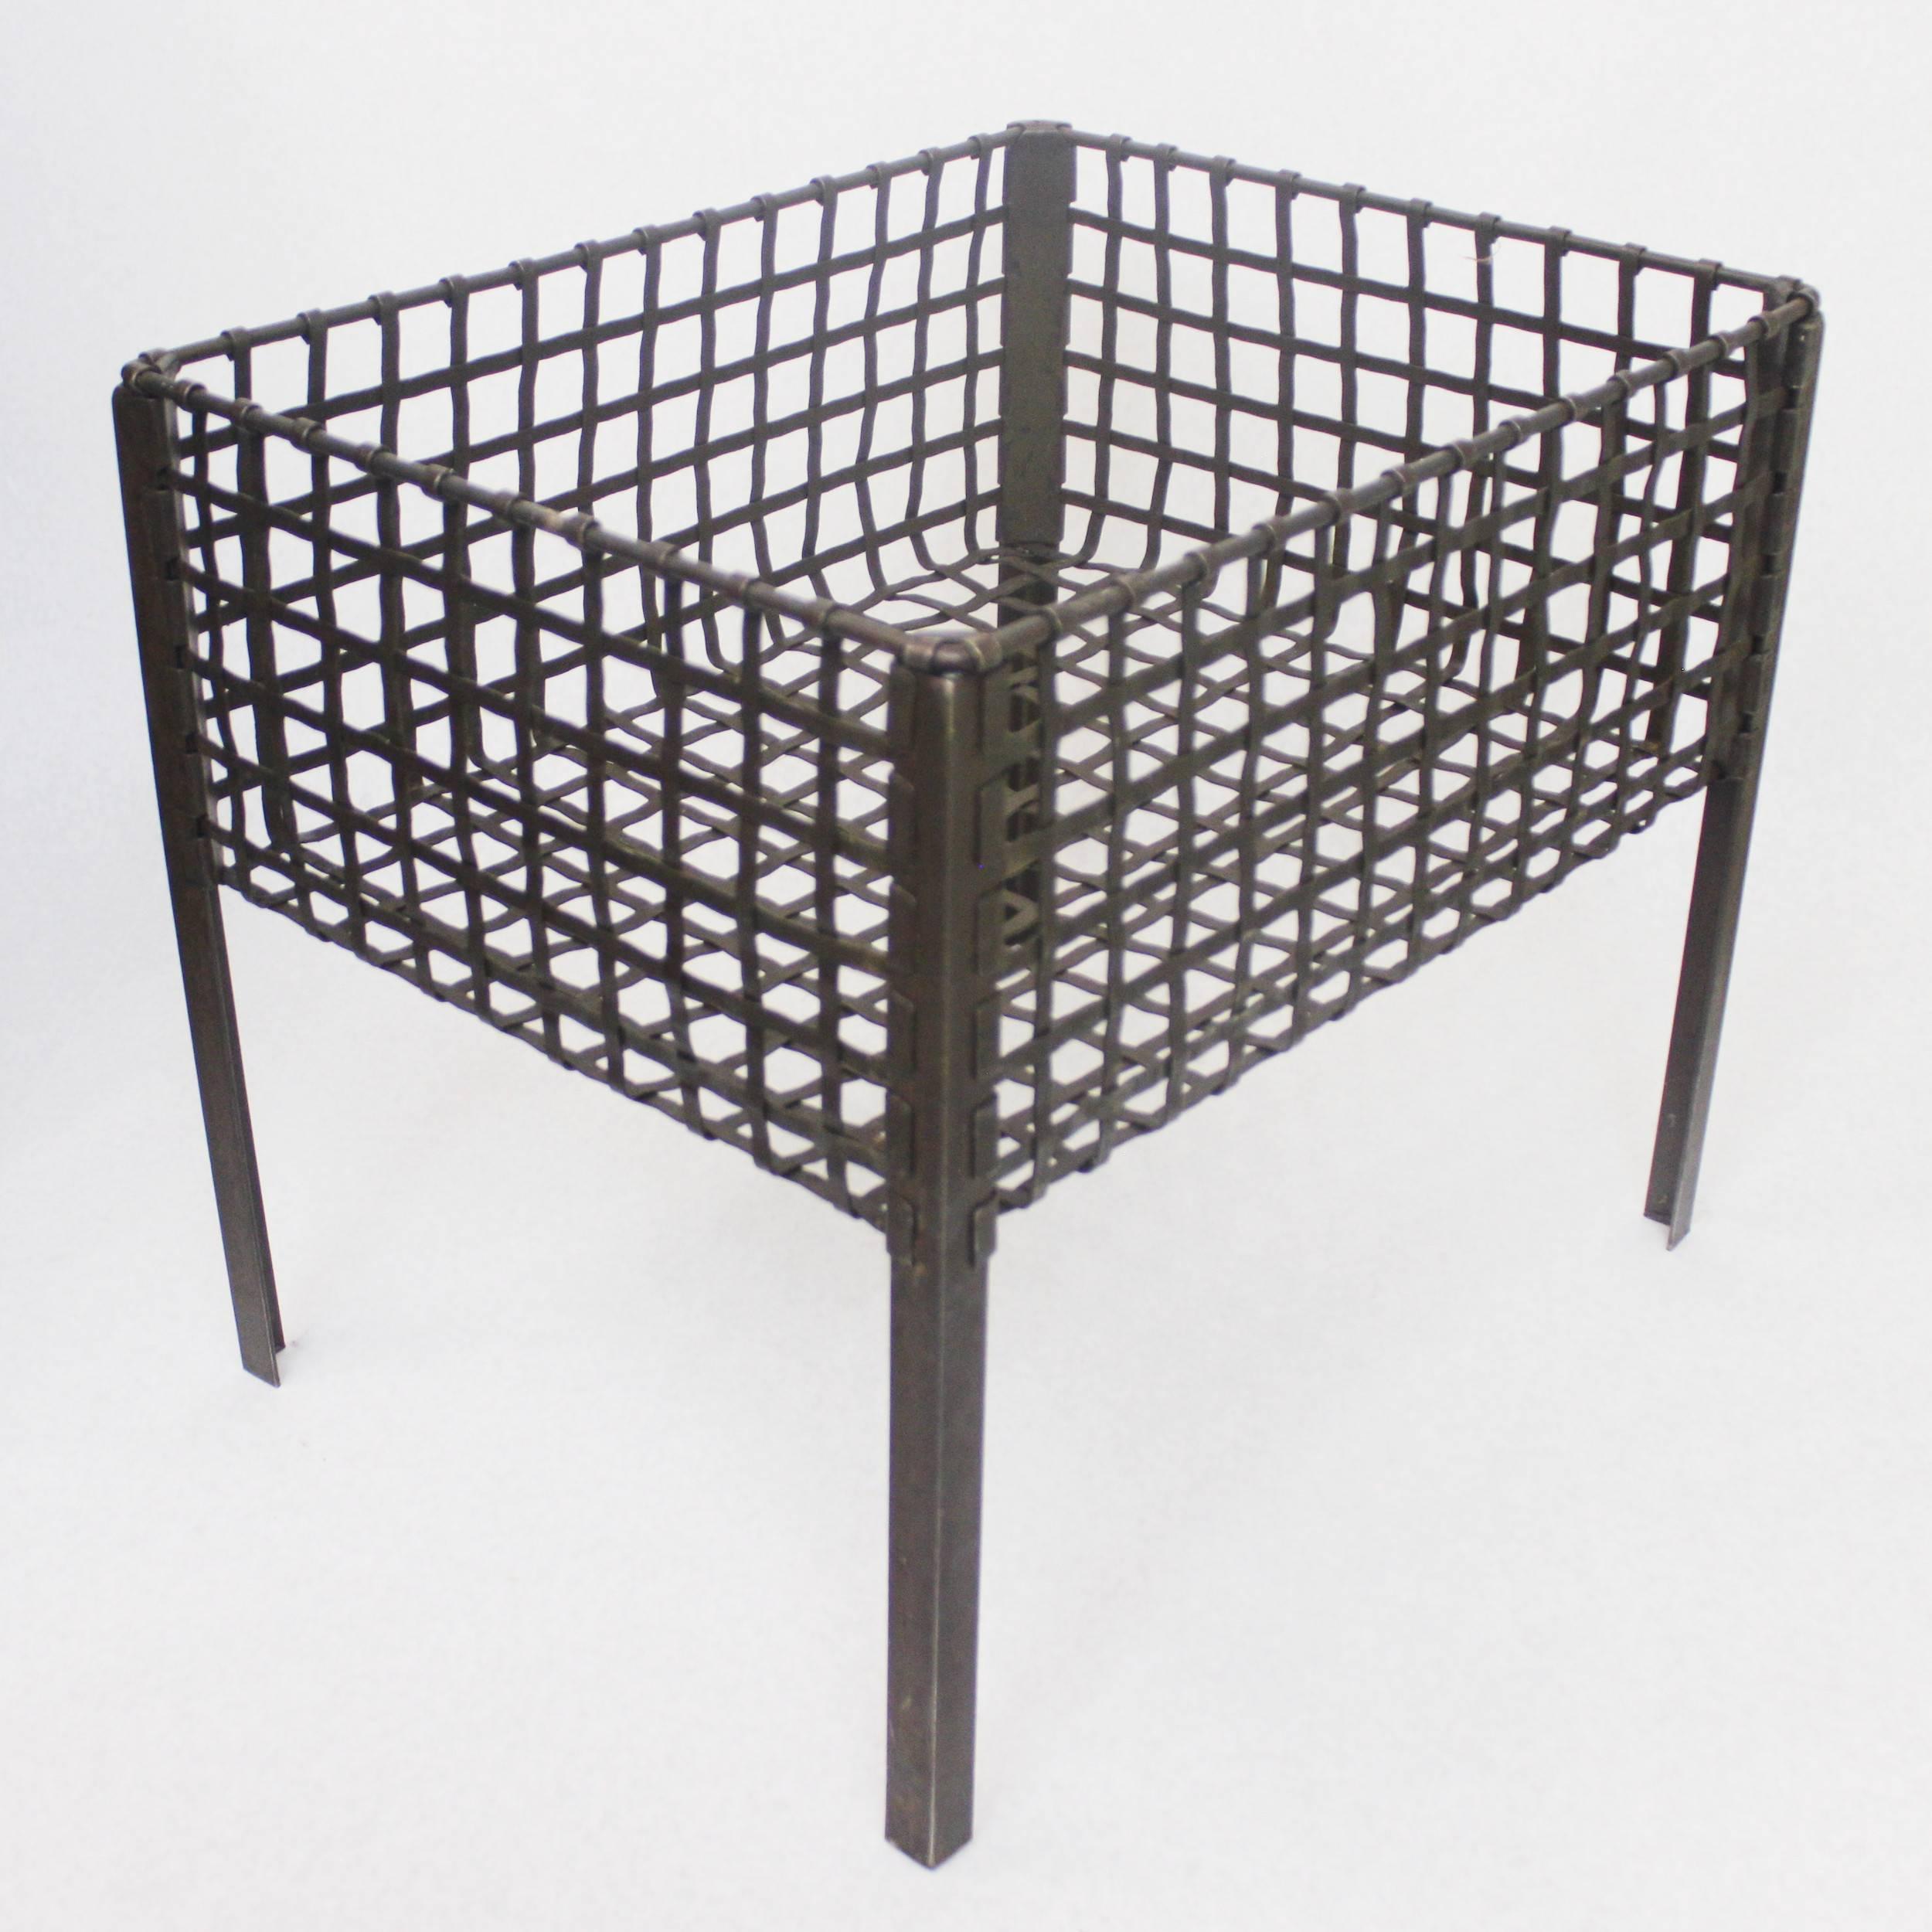 These 1940s era metal baskets came out of an Illinois state penitentiary manufacturing facility. Baskets feature a 8.5 inch deep woven steel receptacle atop four angle-iron legs finished in a dark, army green paint. Baskets have been given a fresh